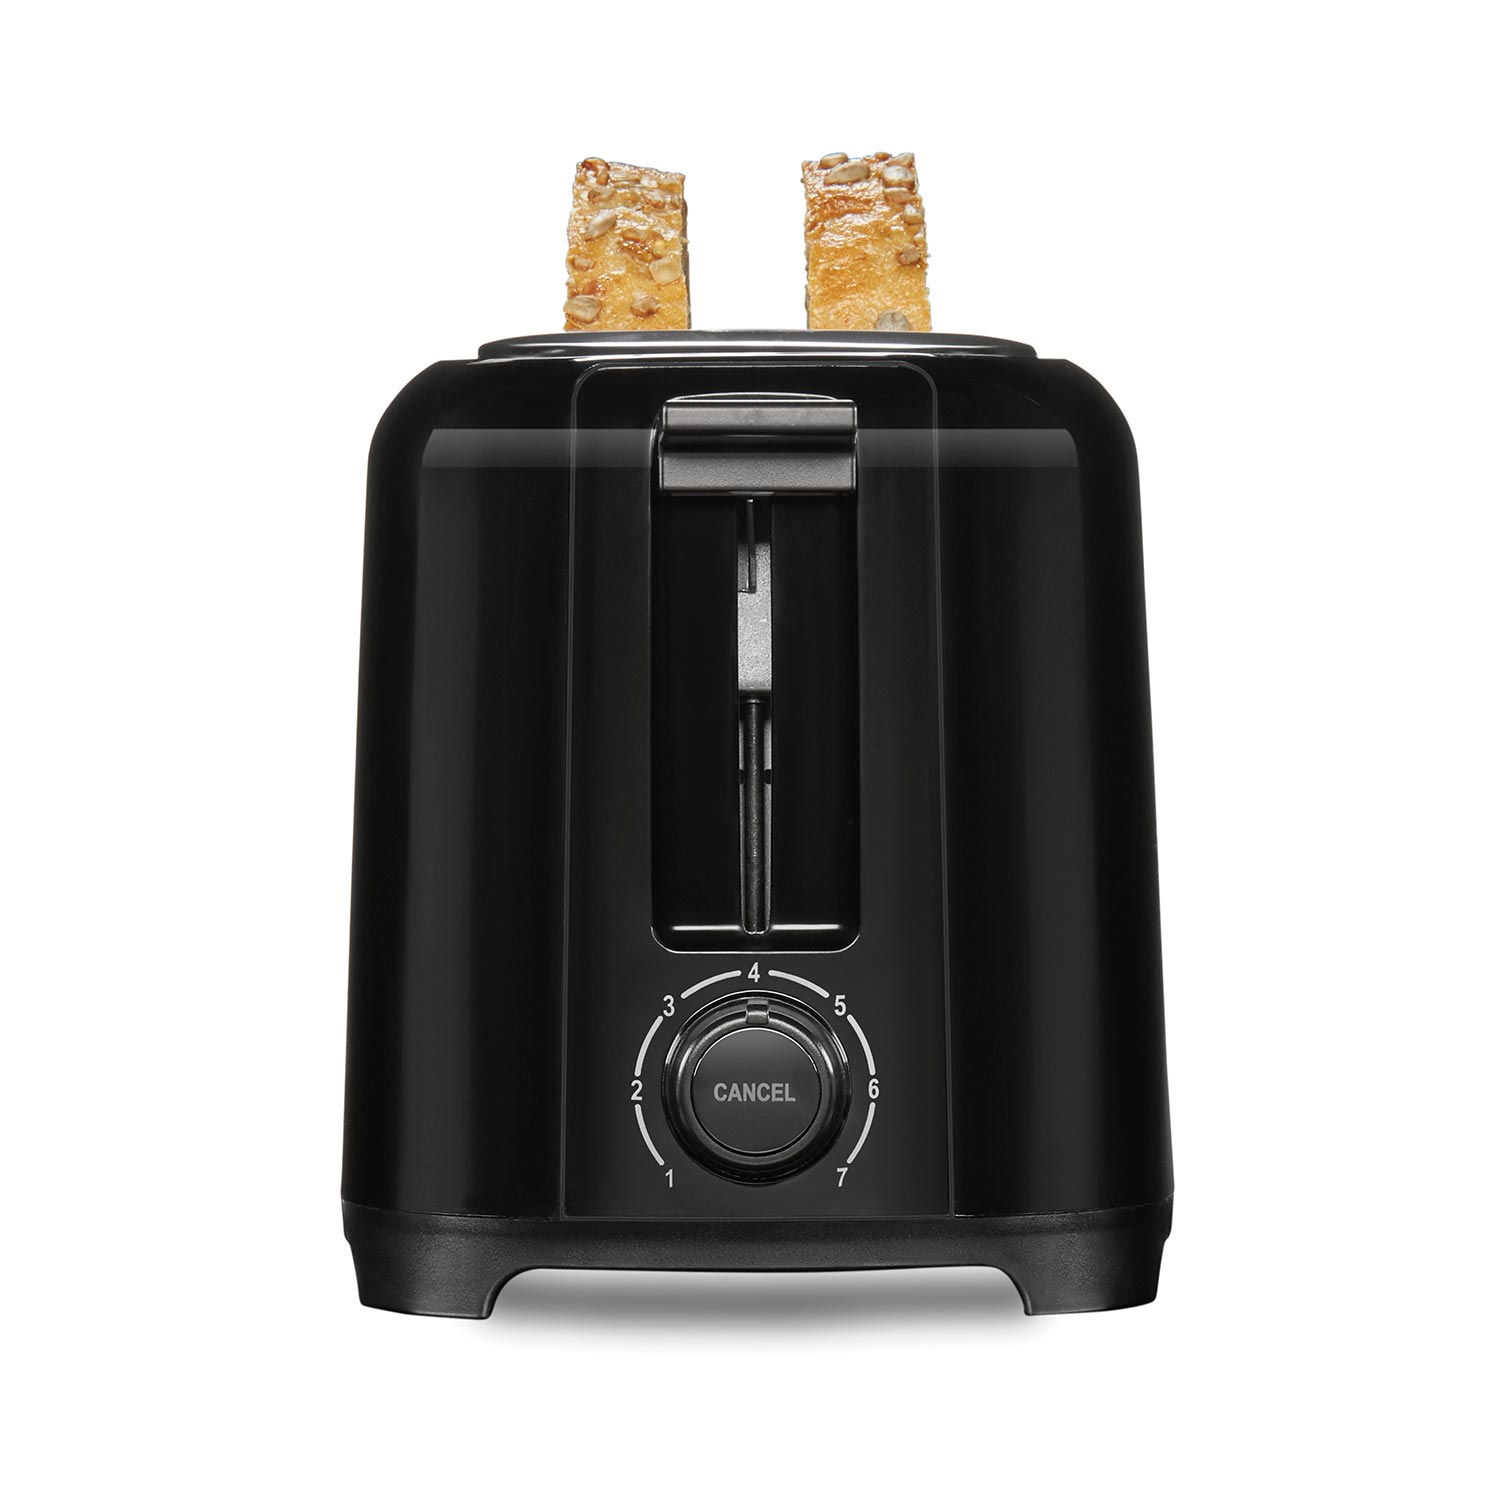 Wide-Slot 2 Slice Toaster - 22305 Small Size